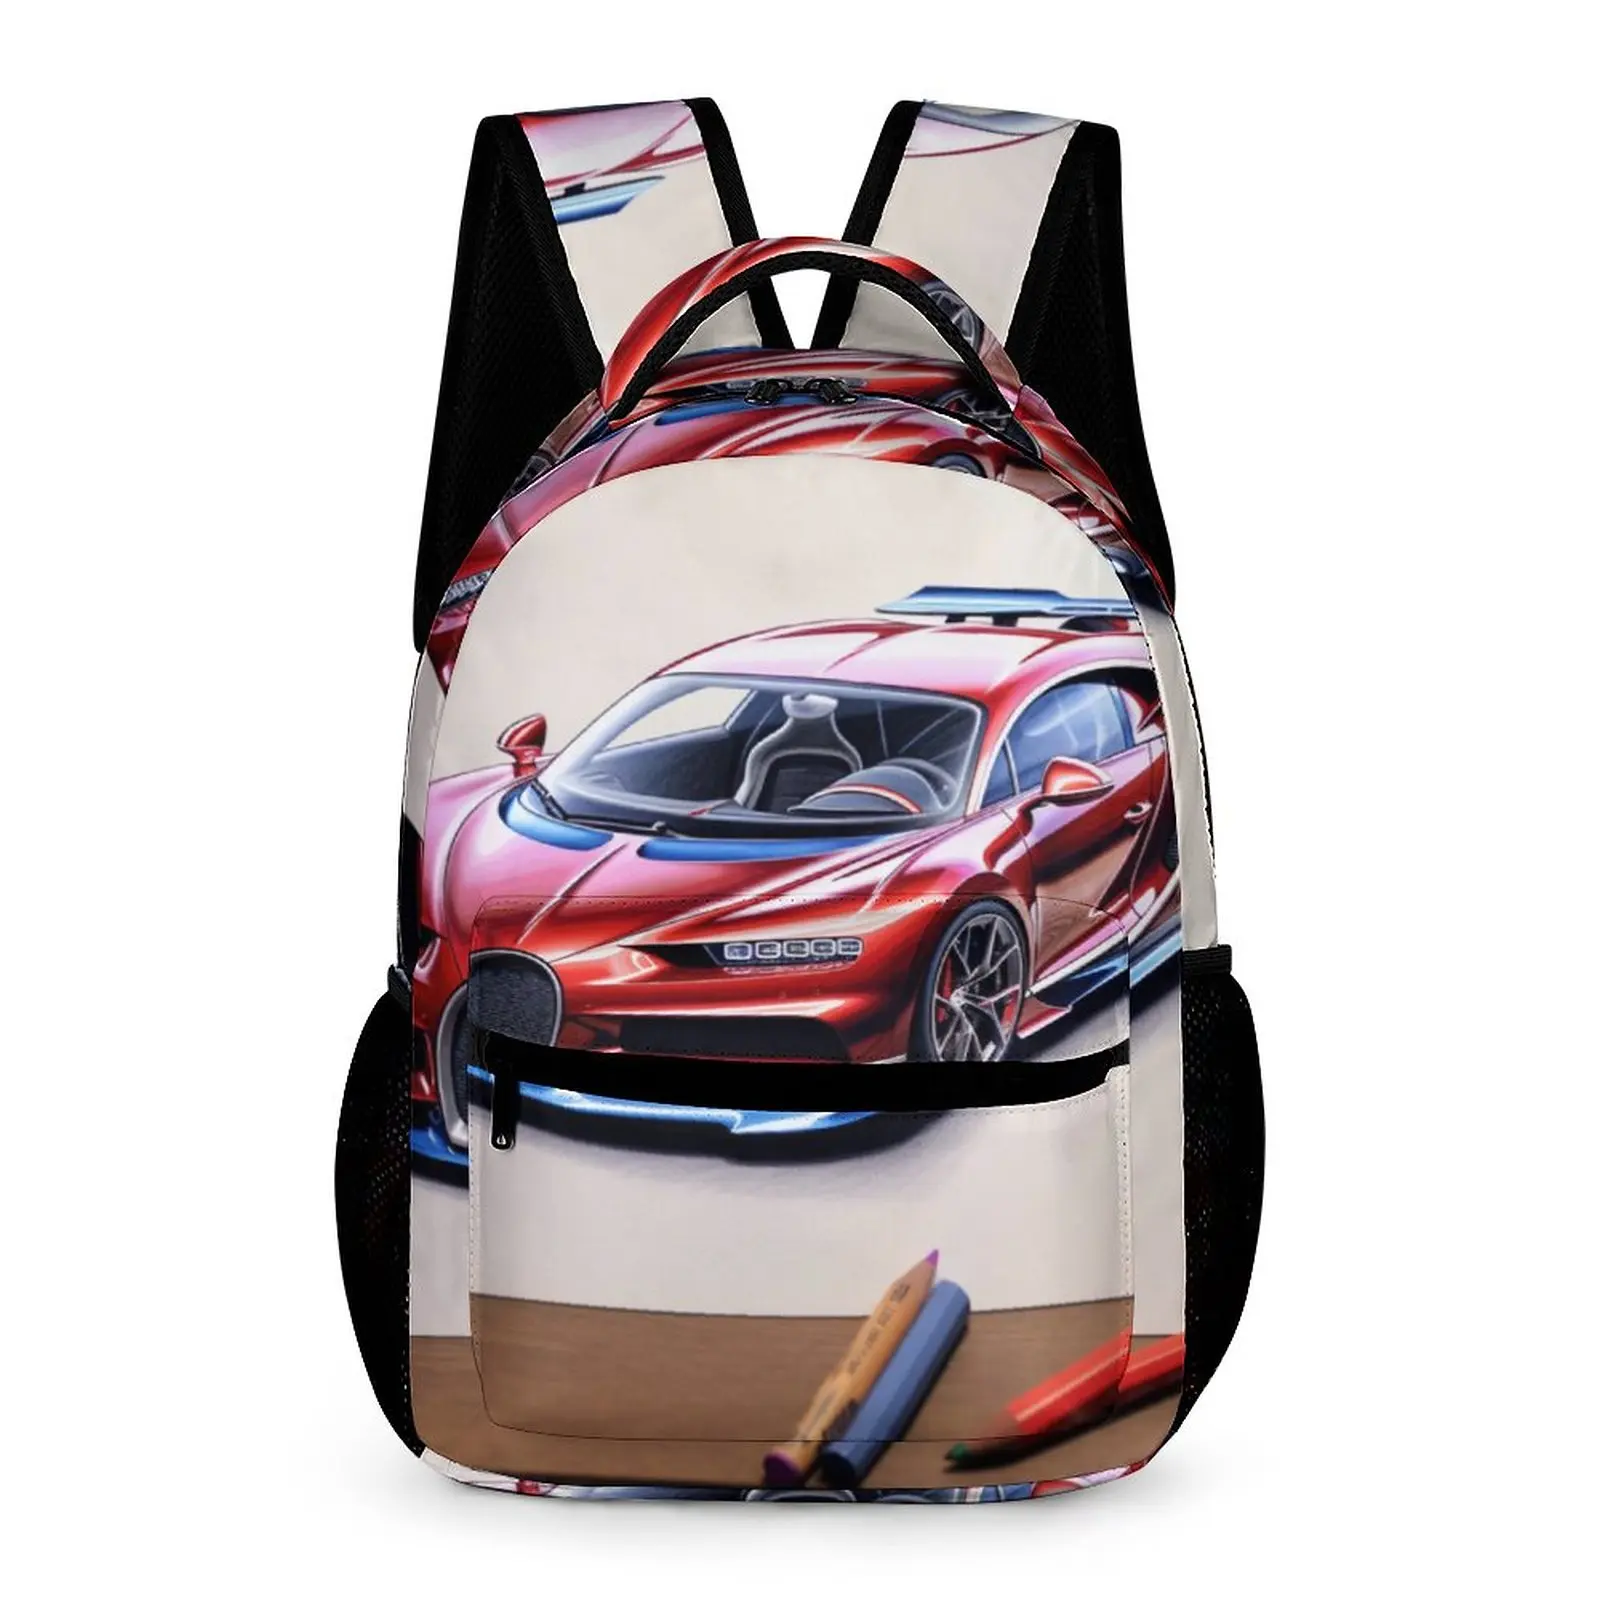 

Sports Car Backpack Colored Cartoon Pencil Art Women Men Polyester Outdoor Style Backpacks Soft Pretty School Bags Rucksack